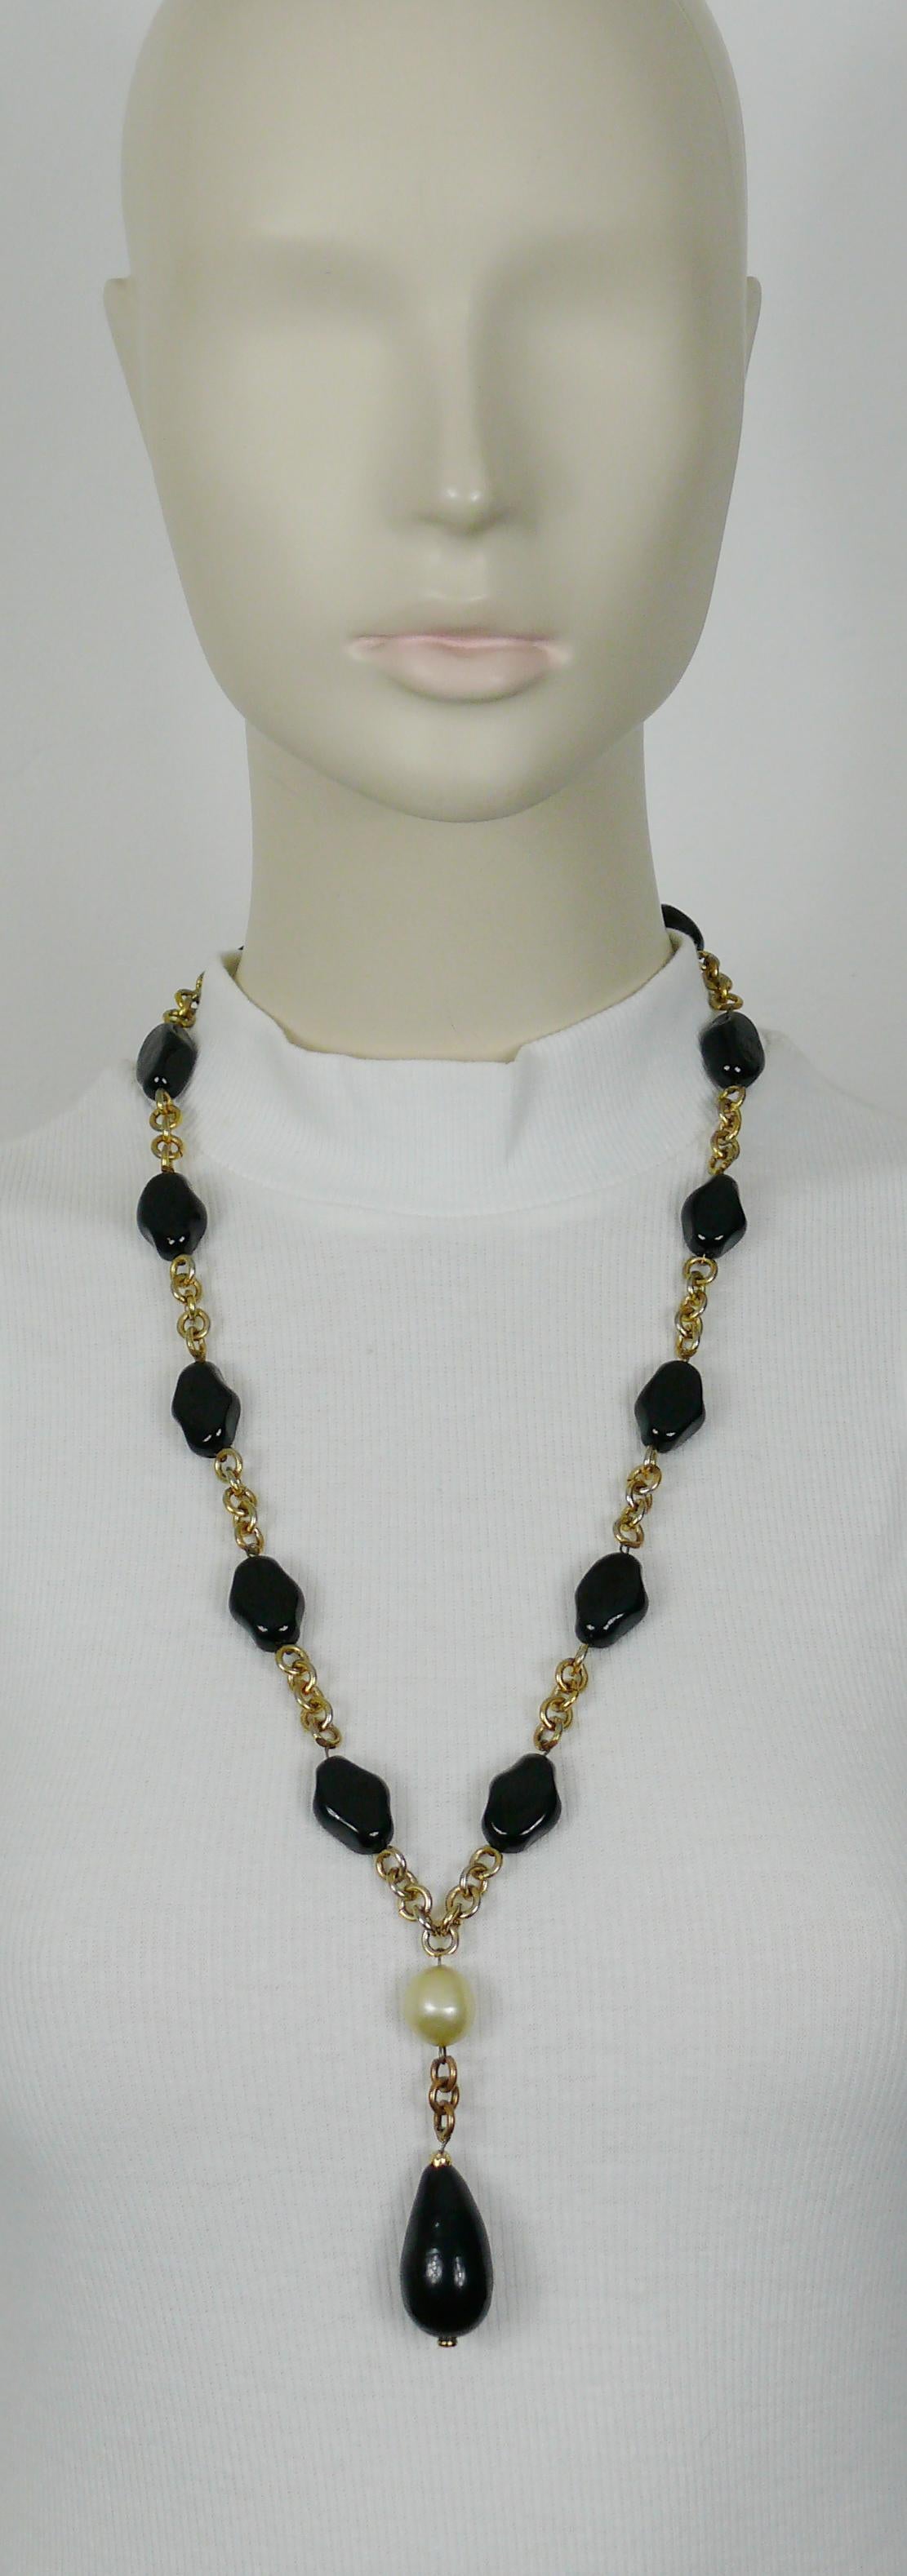 CHANEL vintage gold tone chain necklace featuring pebble shaped MAISON GRIPOIX black glass beads, a faux pearl and black glass drop.

Hook clasp closure.

Embossed on a round metal tag CHANEL CC 1982.

Indicative measurements : length worn approx.